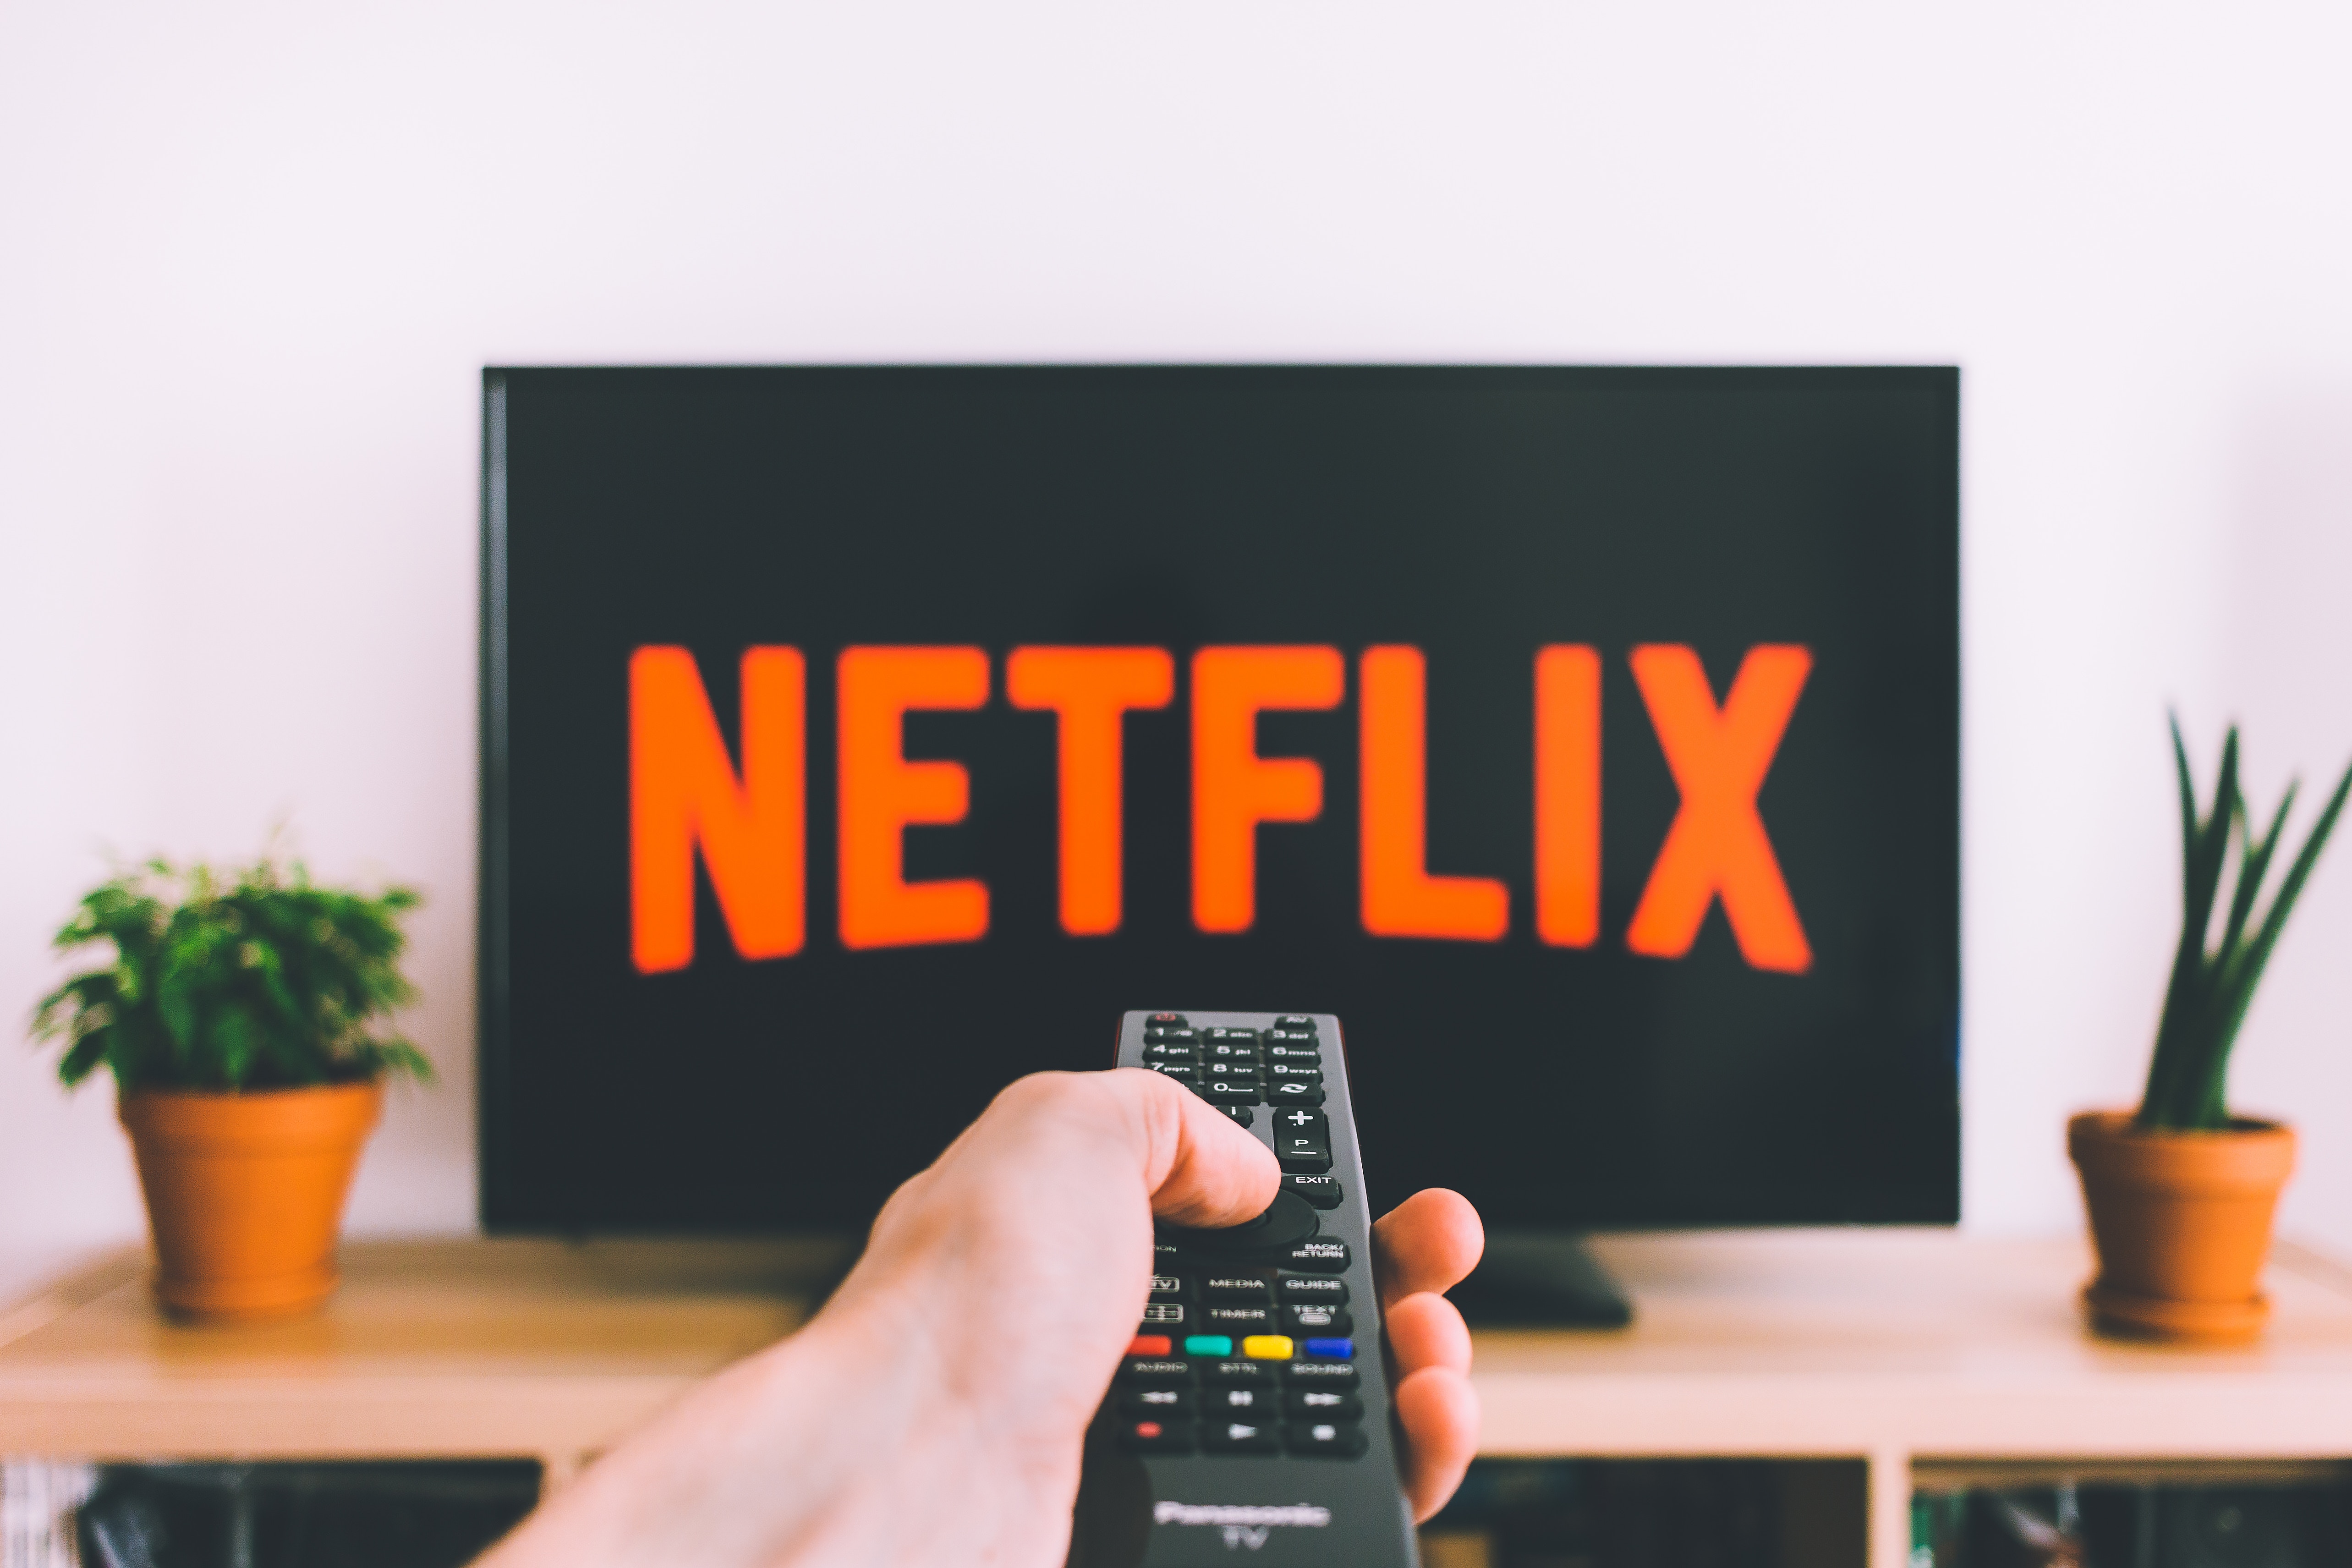 In the foreground a hand holds a remote control pointed at a television. In the background there is a large black TV screen with the word "Netflix" in big red letters.